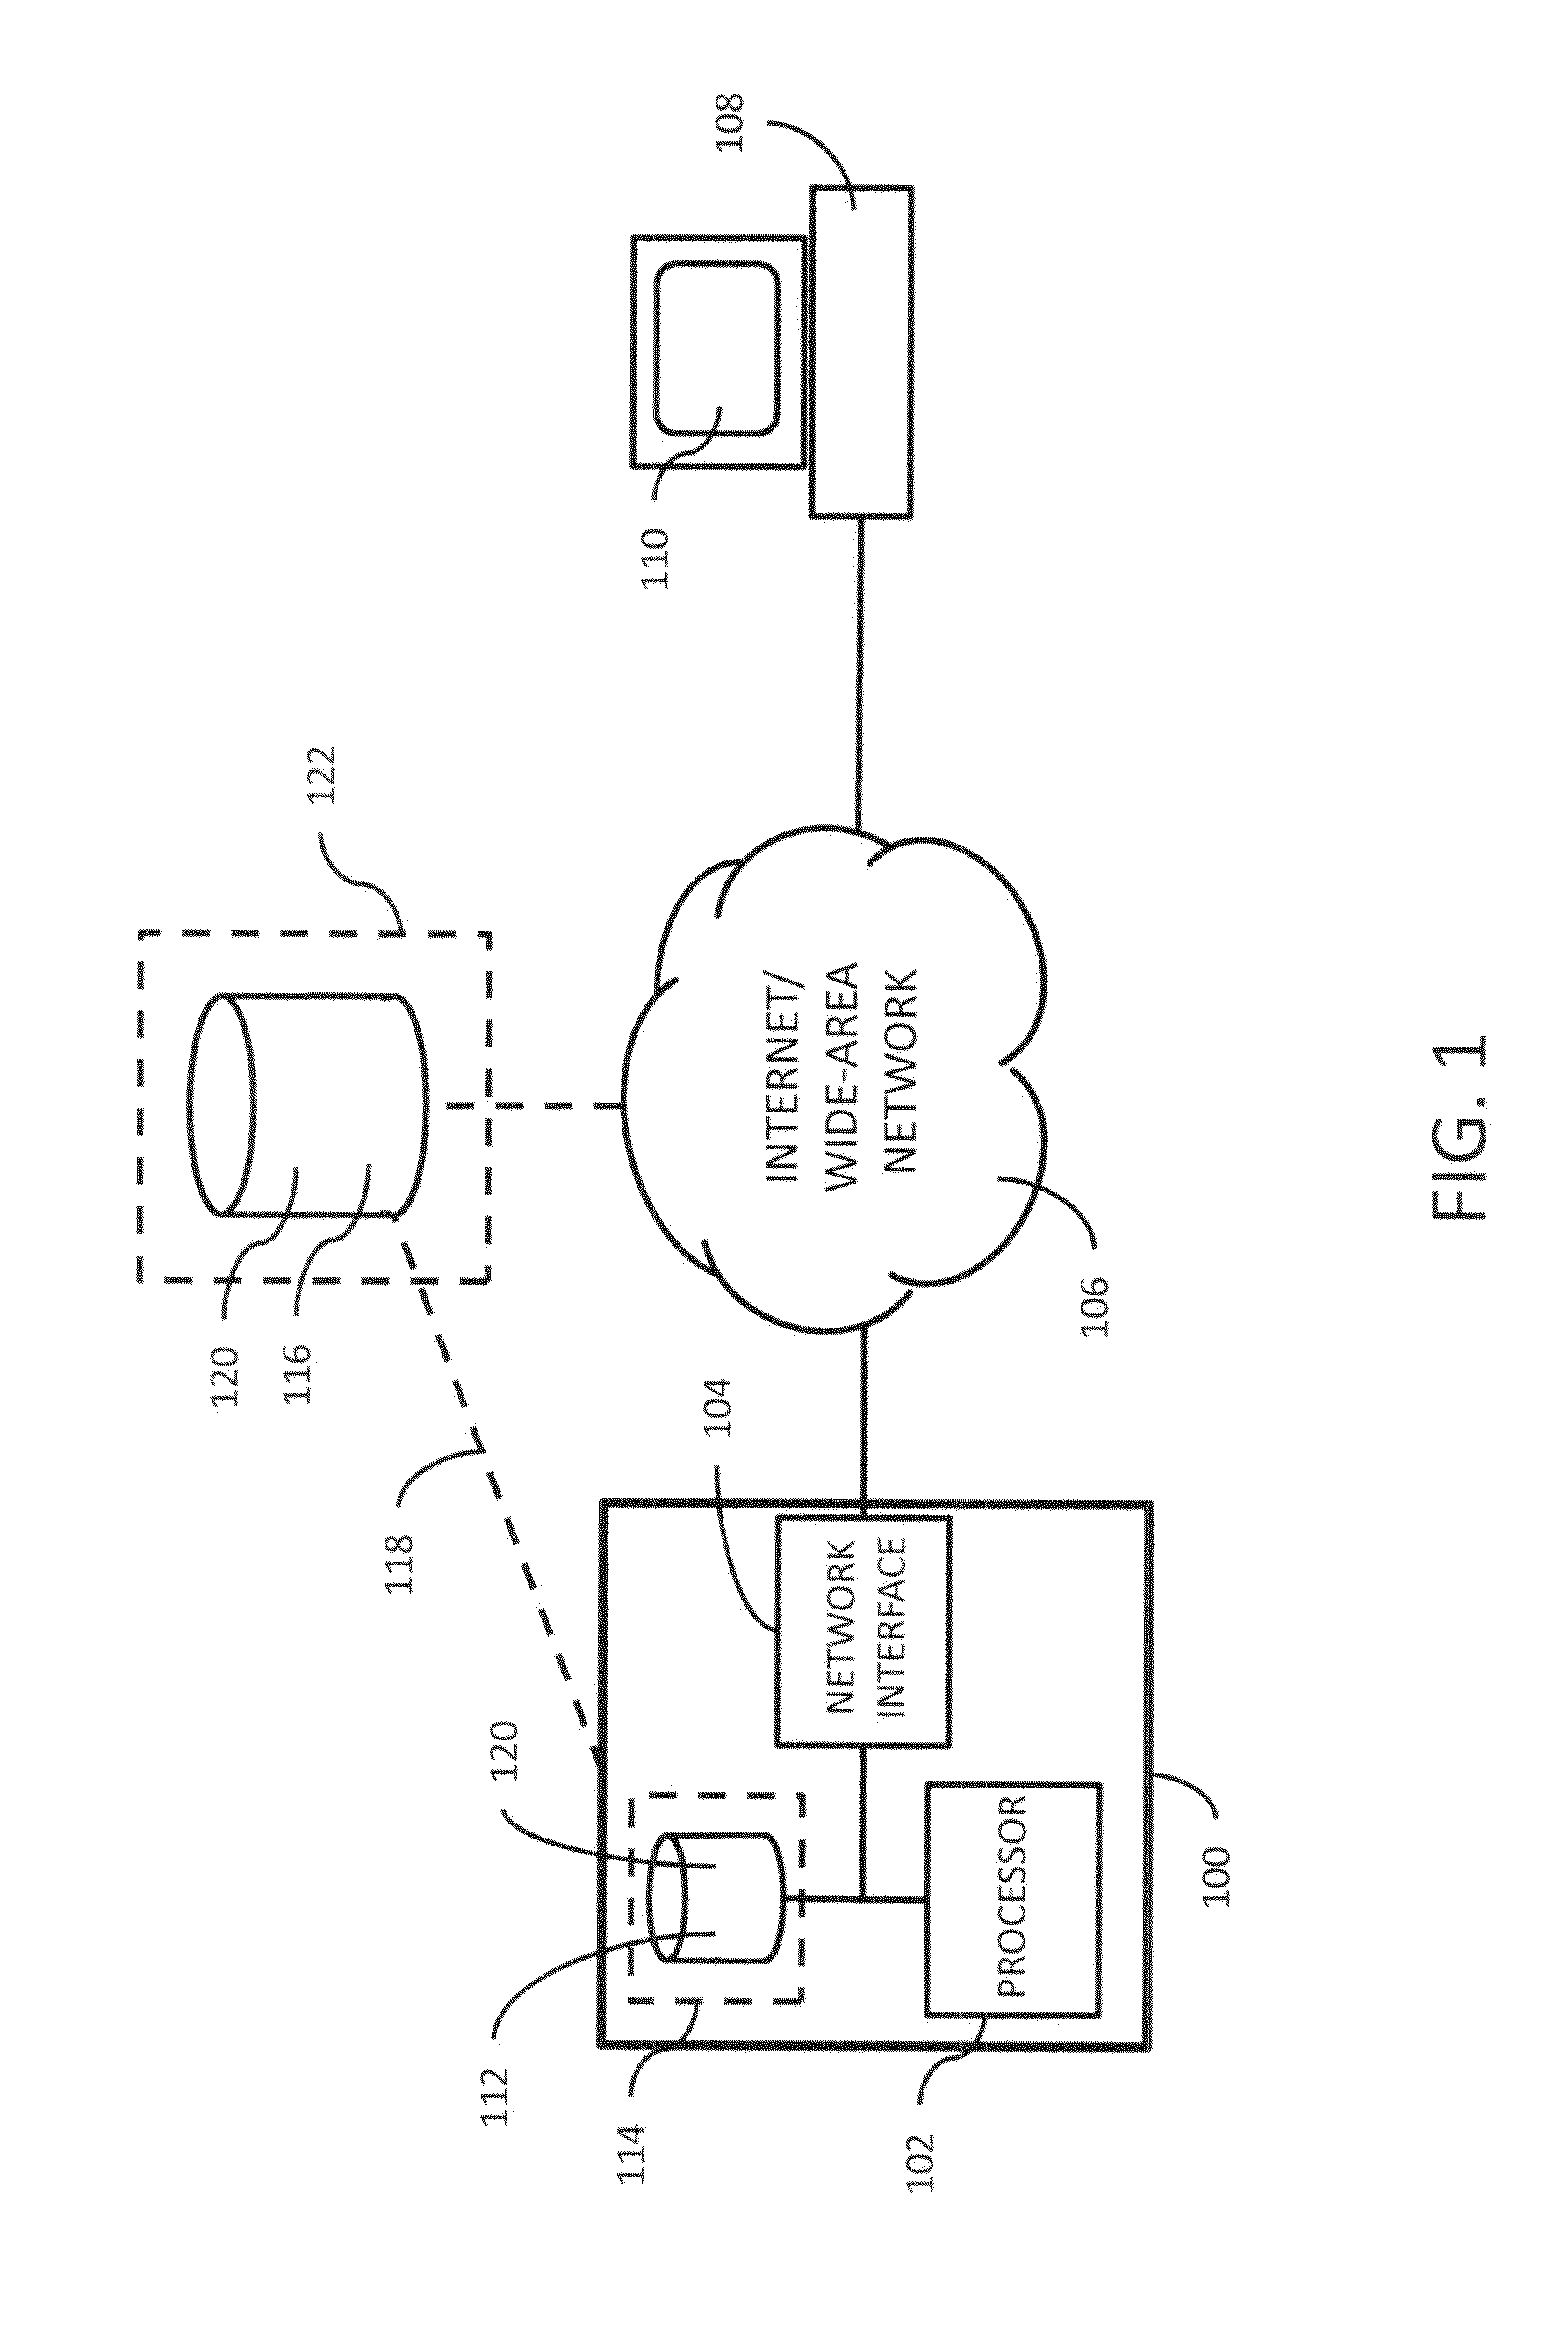 System and methods for proposing media for a web page